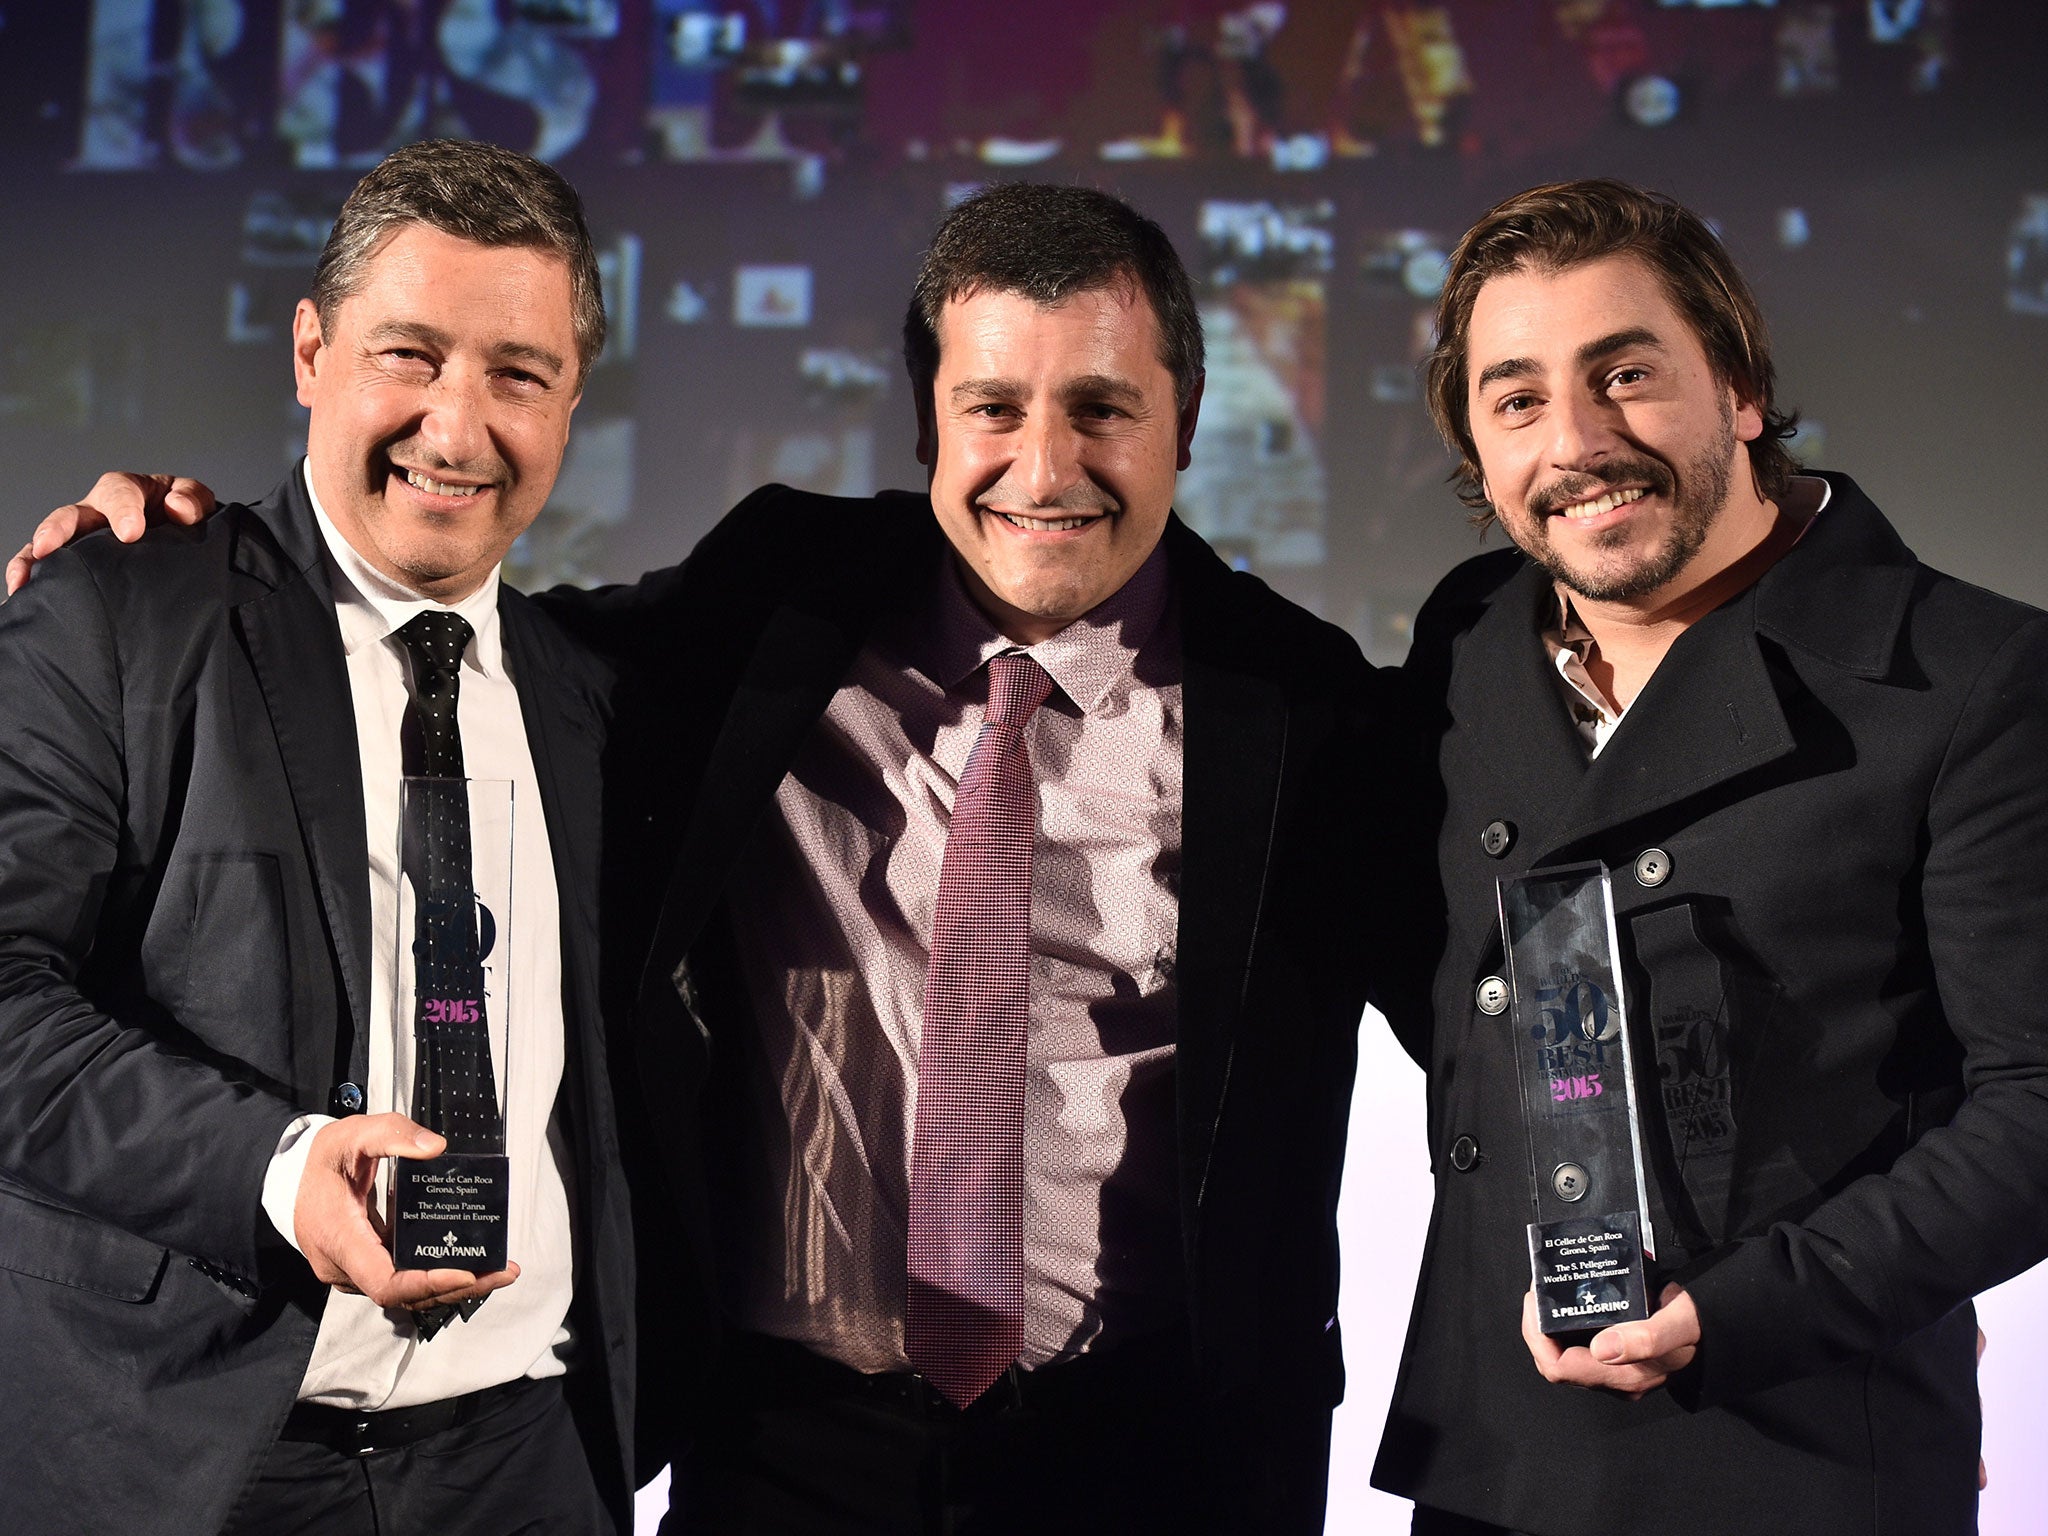 Spanish Restaurant ElCeller de Can Roca owners and brothers, Joan, Josep and Jordi Roca receive their award for best restaurant